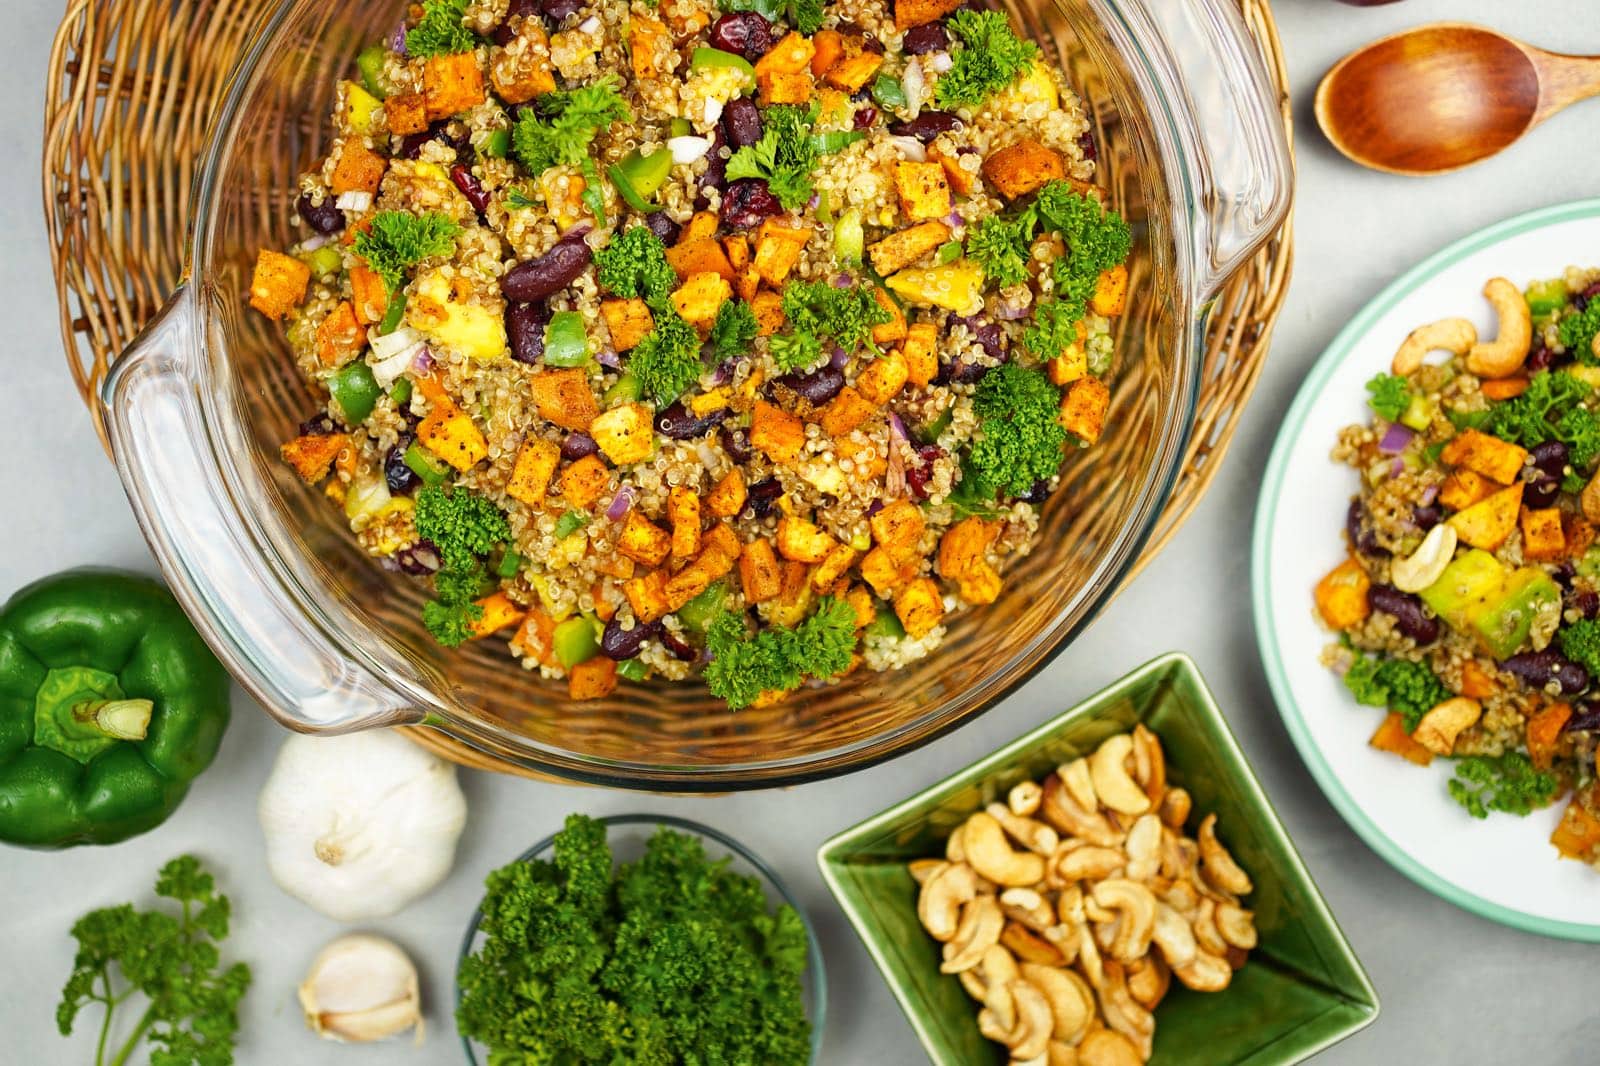 Colorful quinoa salad with vegetables and cashews.